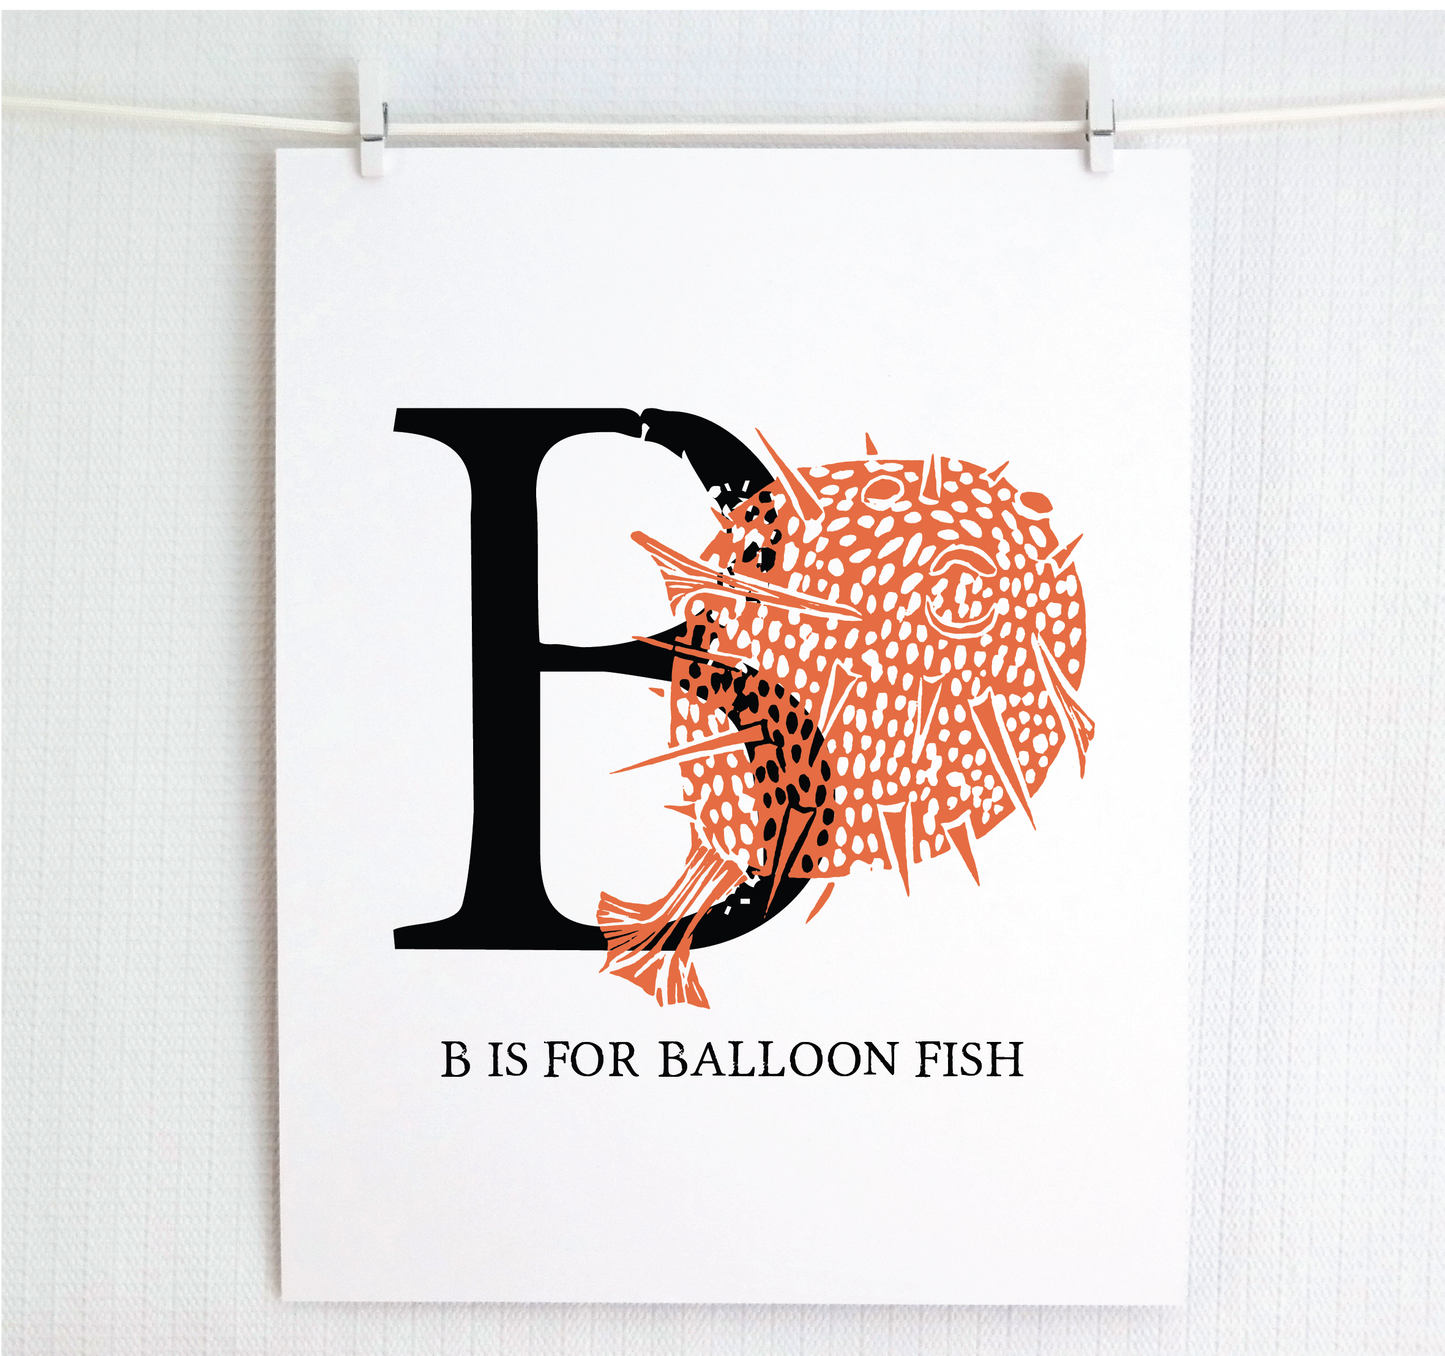 B is for Balloon Fish